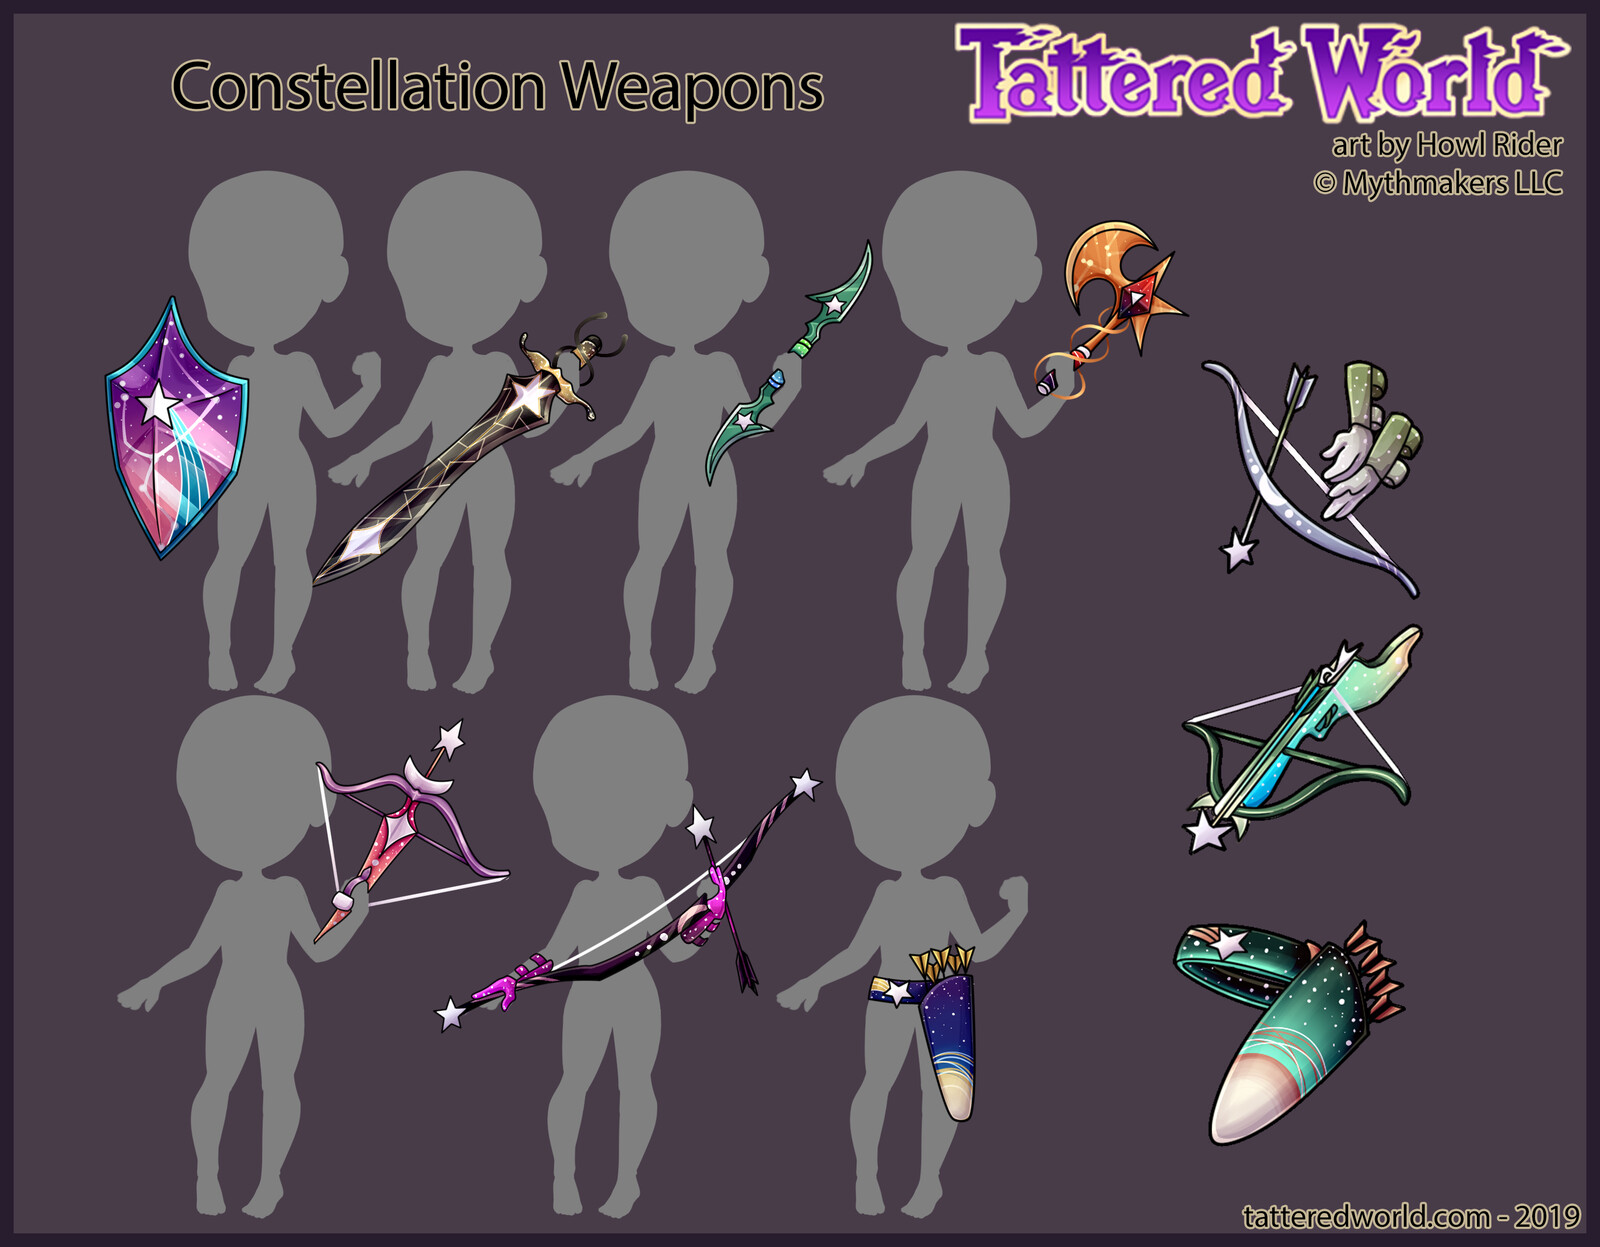 A series of star-themed weapons. I also designed the colour template, which is now used on other items.